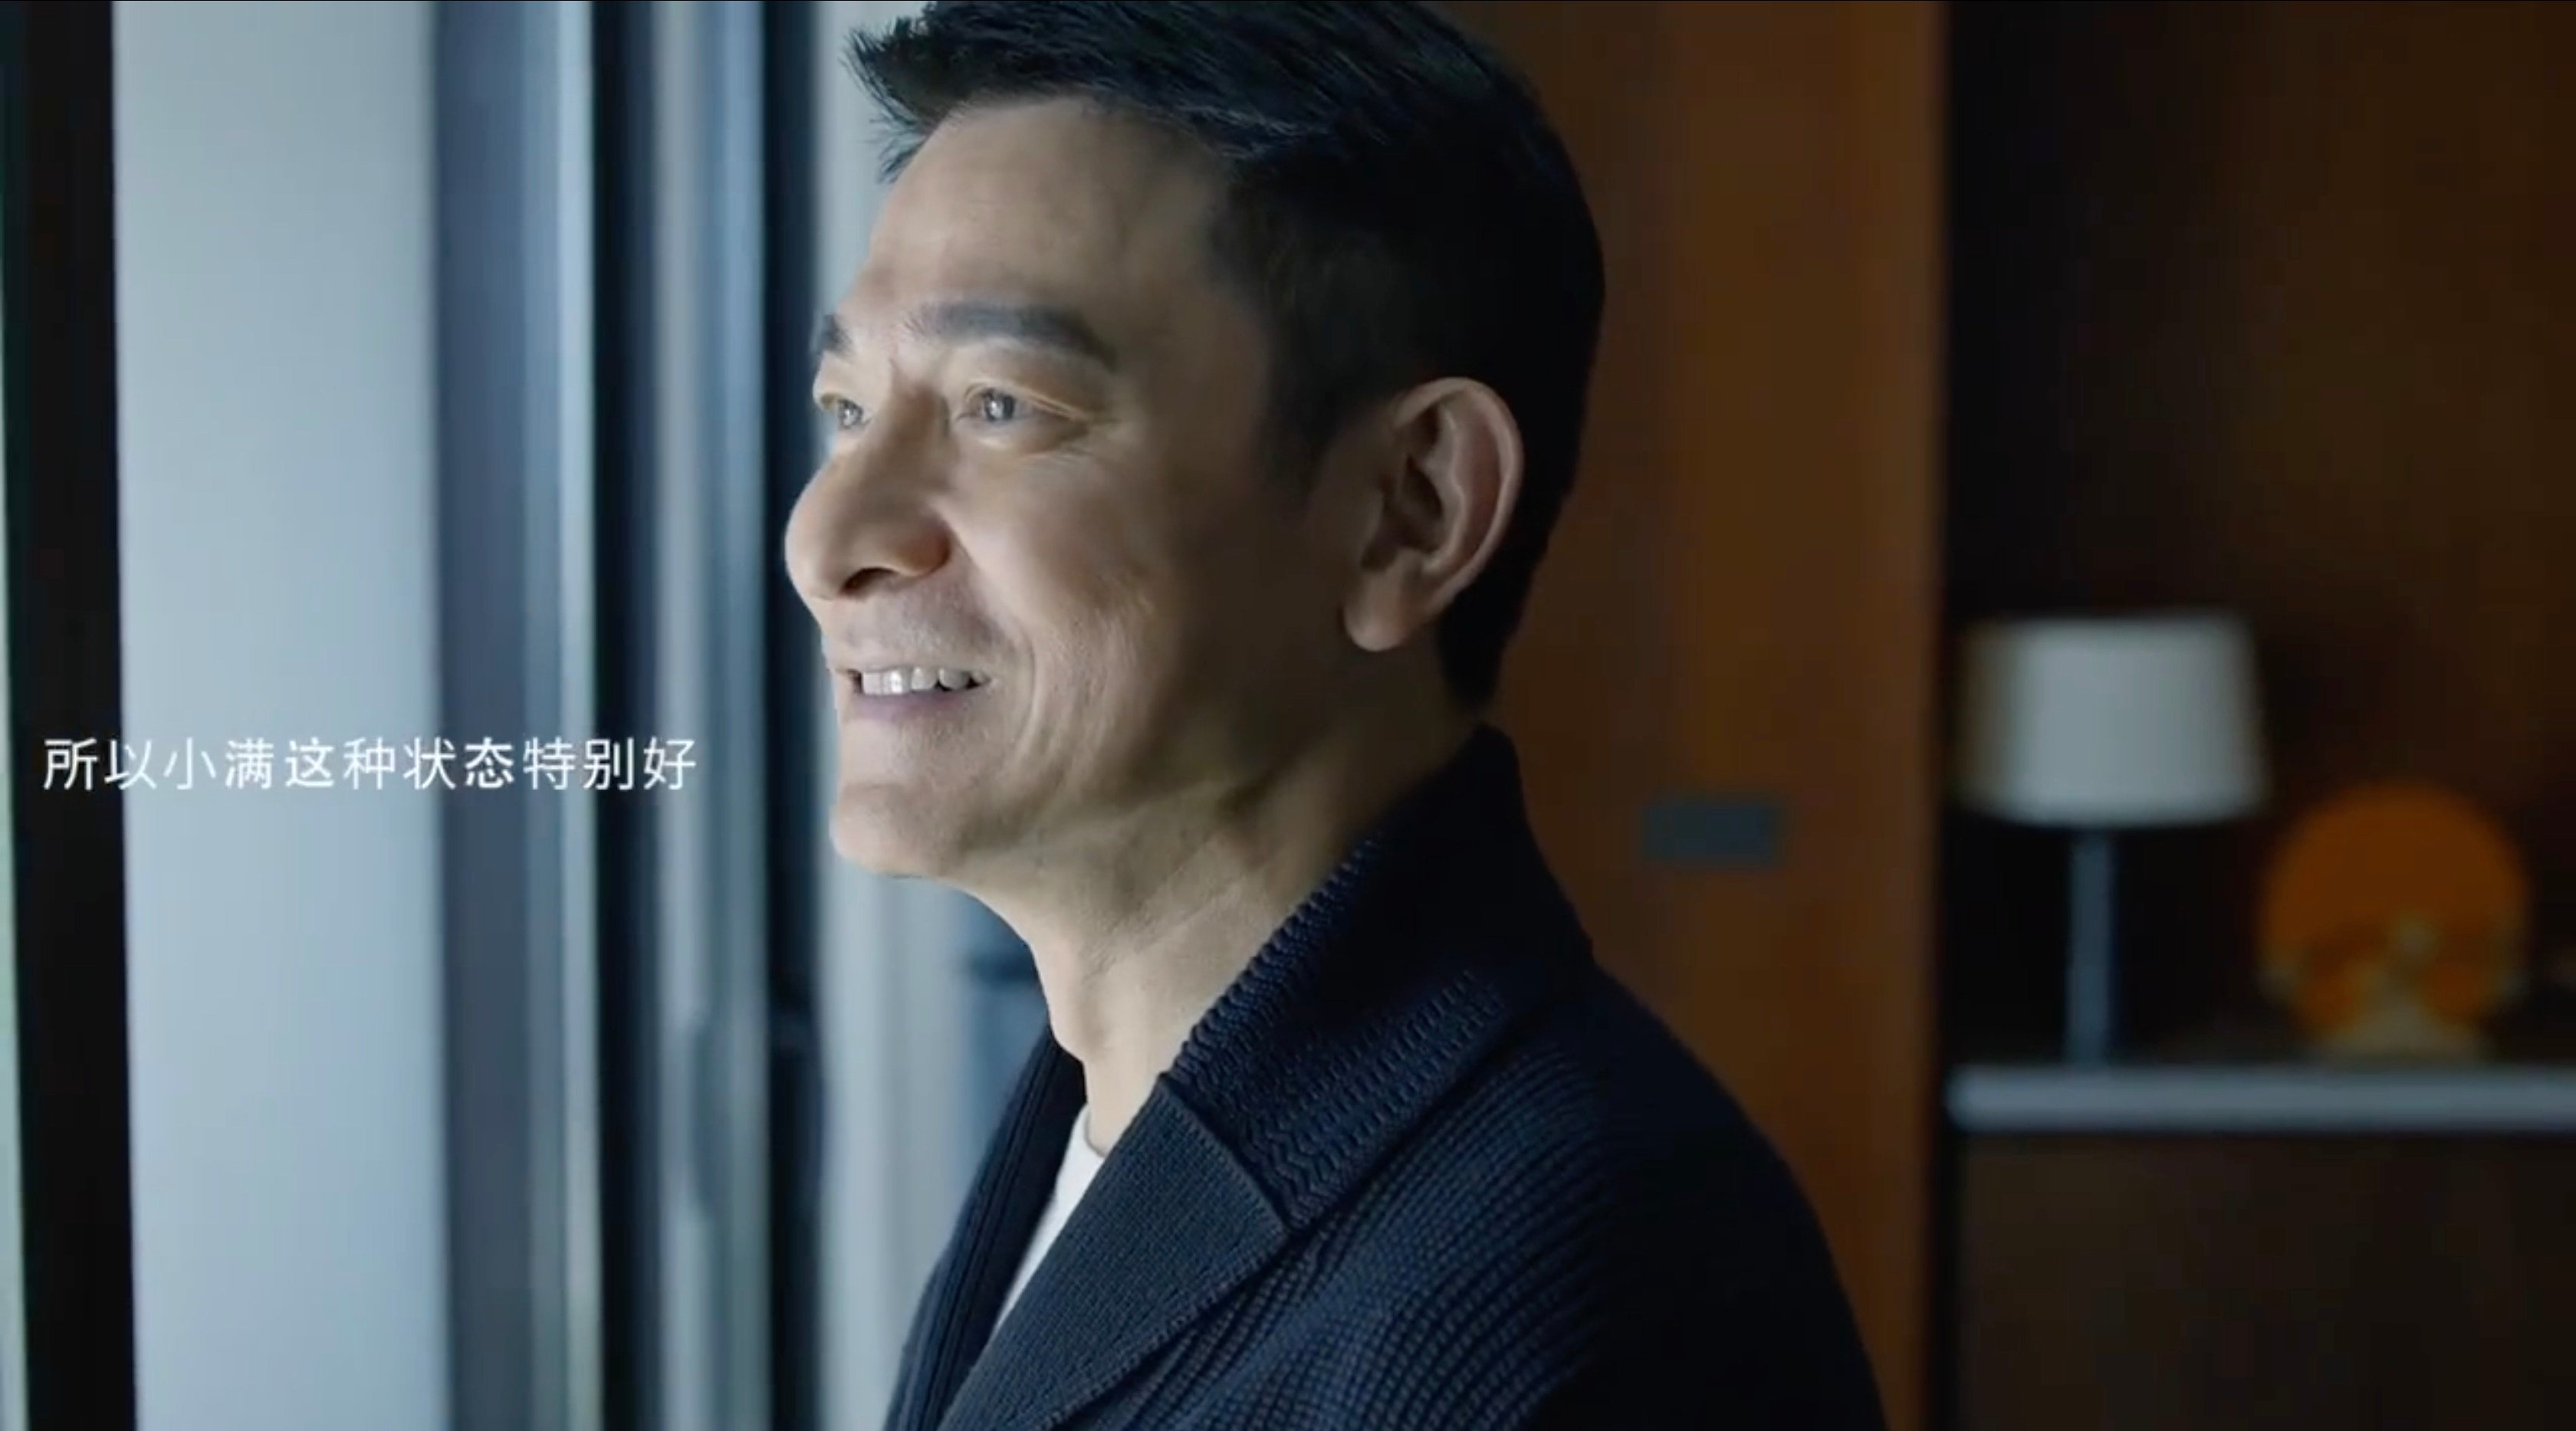 Hong Kong actor Andy Lau Tak-wah also apologised for the plagiarised content used on his video ad with carmaker Audi. Photo: Handout